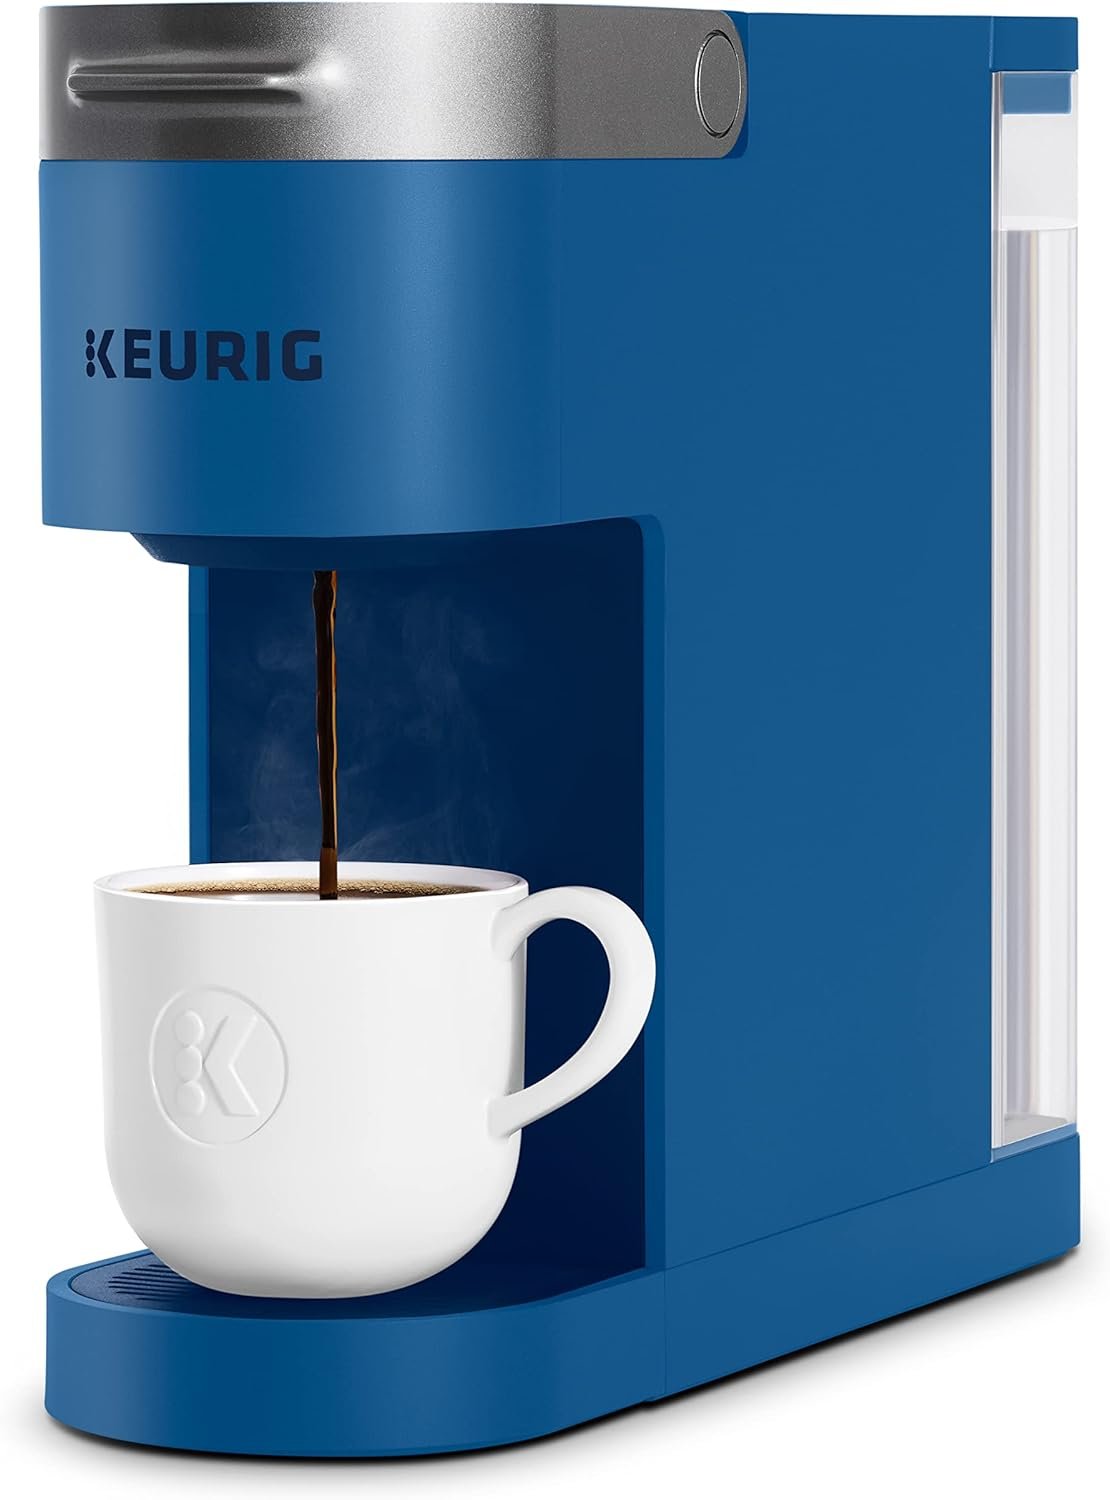 Keurig K-Slim Single Serve K-Cup Pod Coffee Maker, Featuring Simple Push Button Controls And MultiStream Technology, Twilight Blue